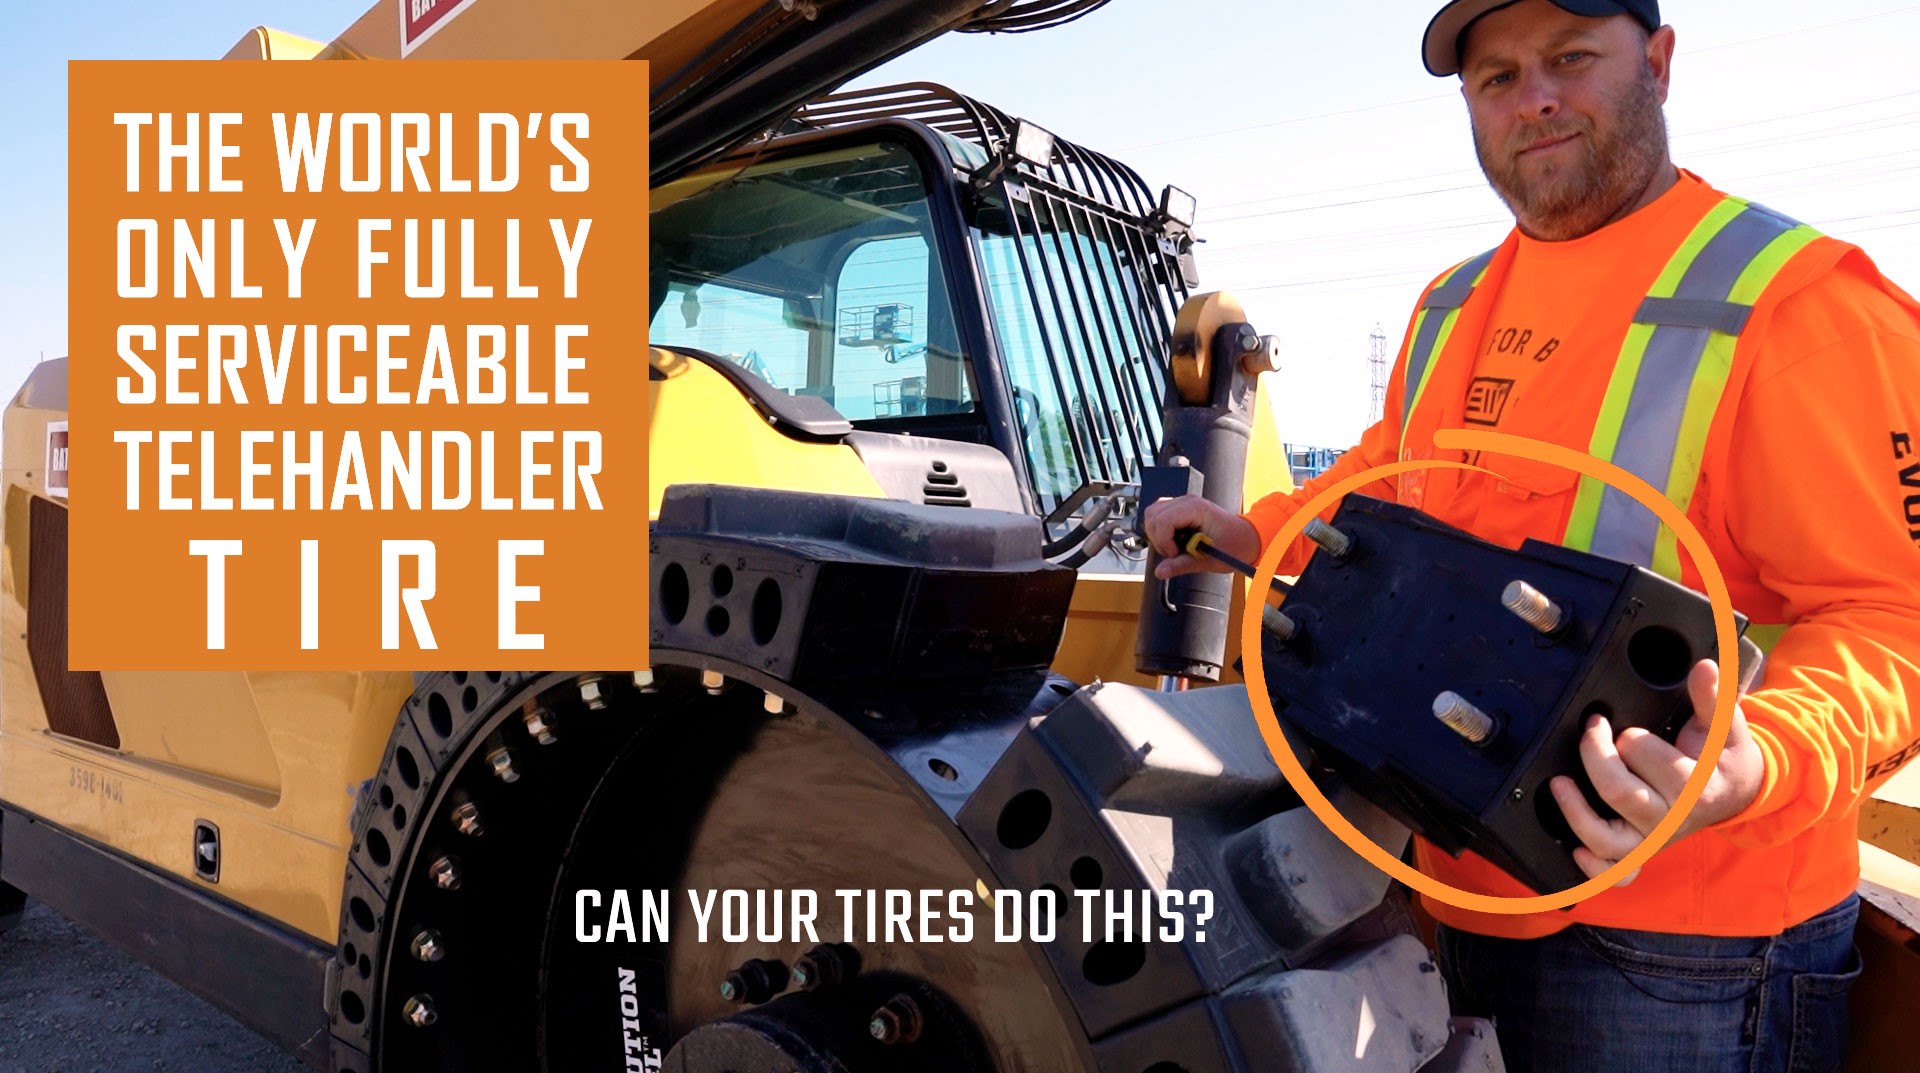 This video is about the world's only fully serviceable Xtreme telehandler tires